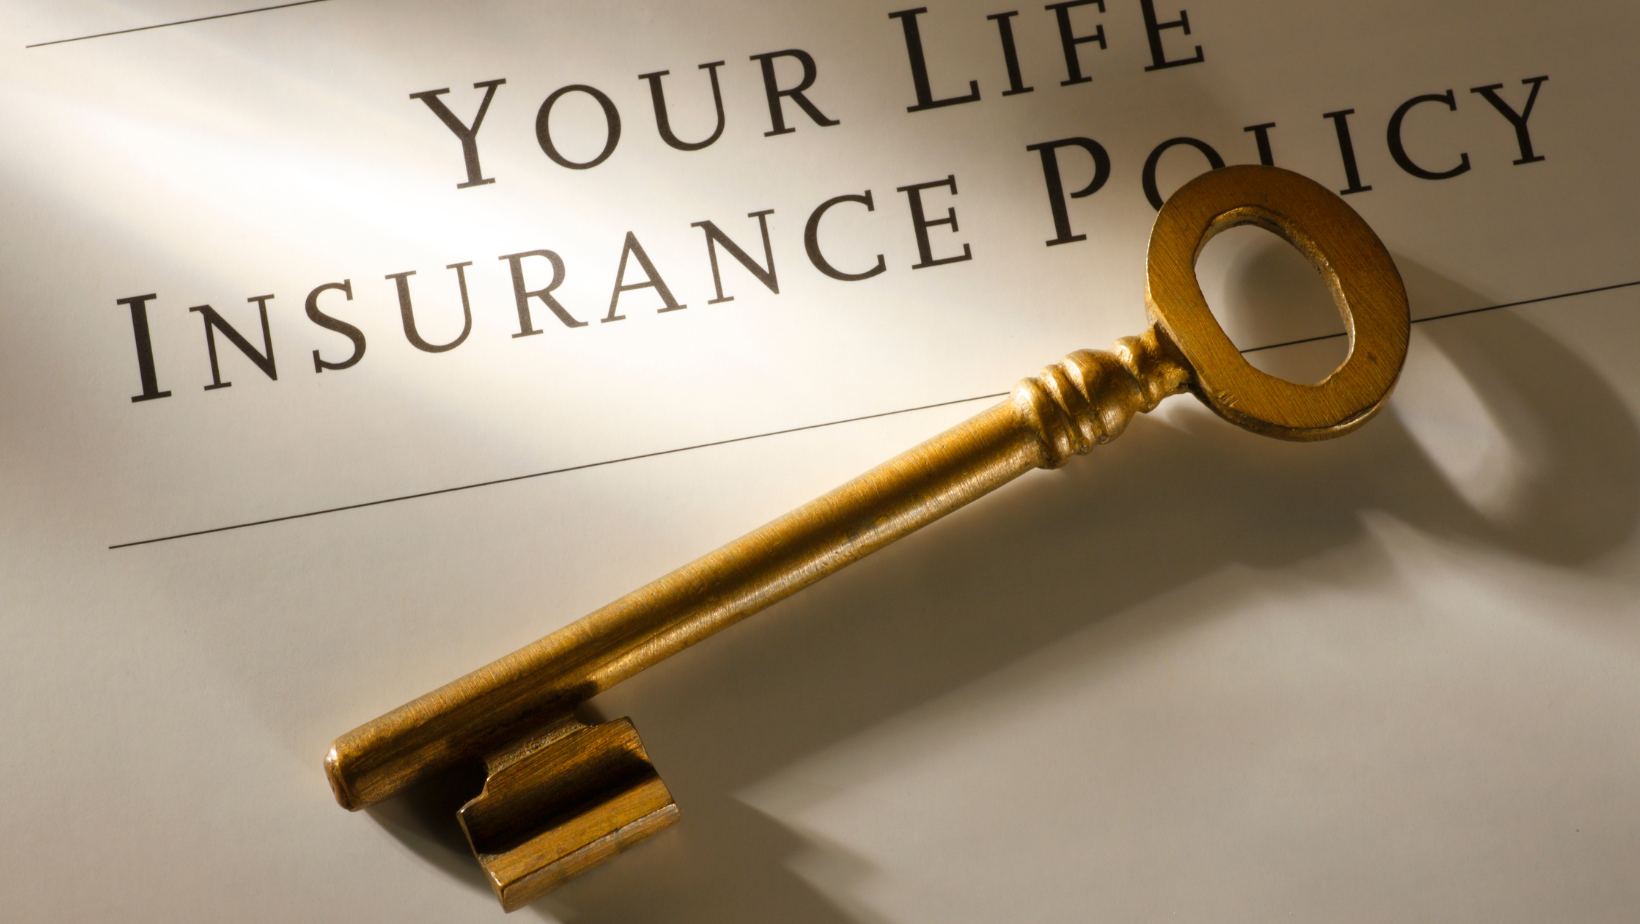 The concept of life insurance policies in islam